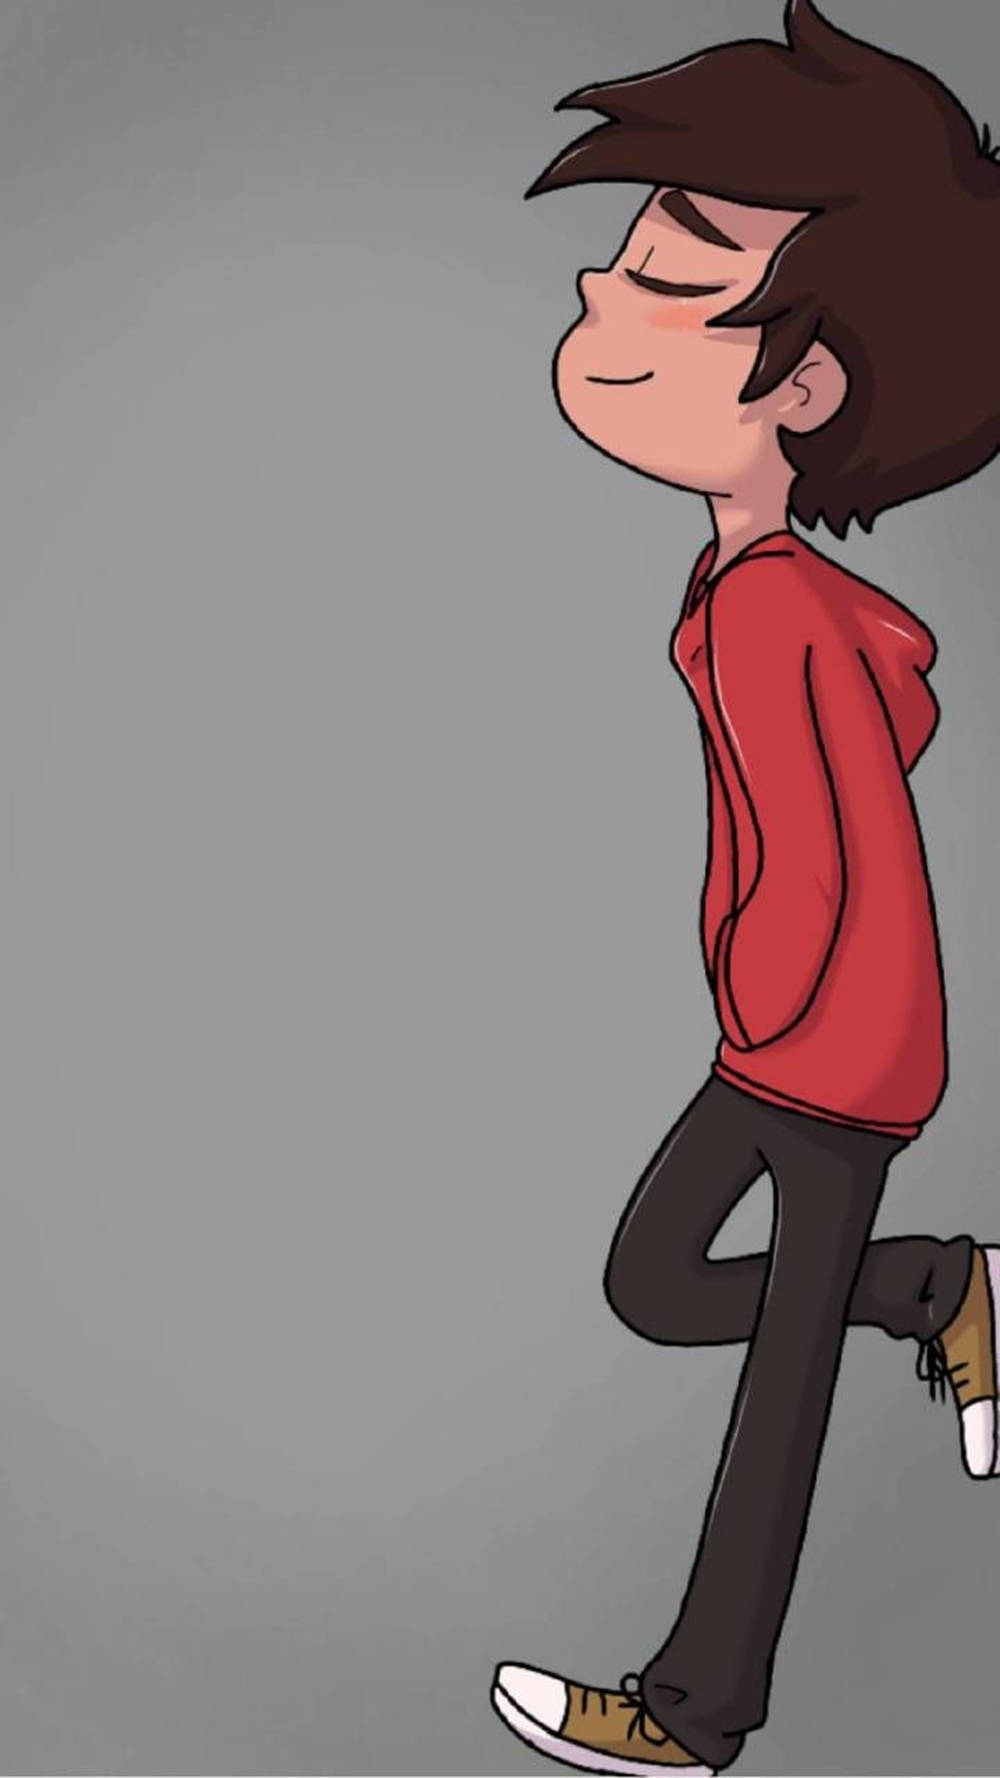 Caption: Cool Marco, The Cute Boy Cartoon Leaning On A Wall Background